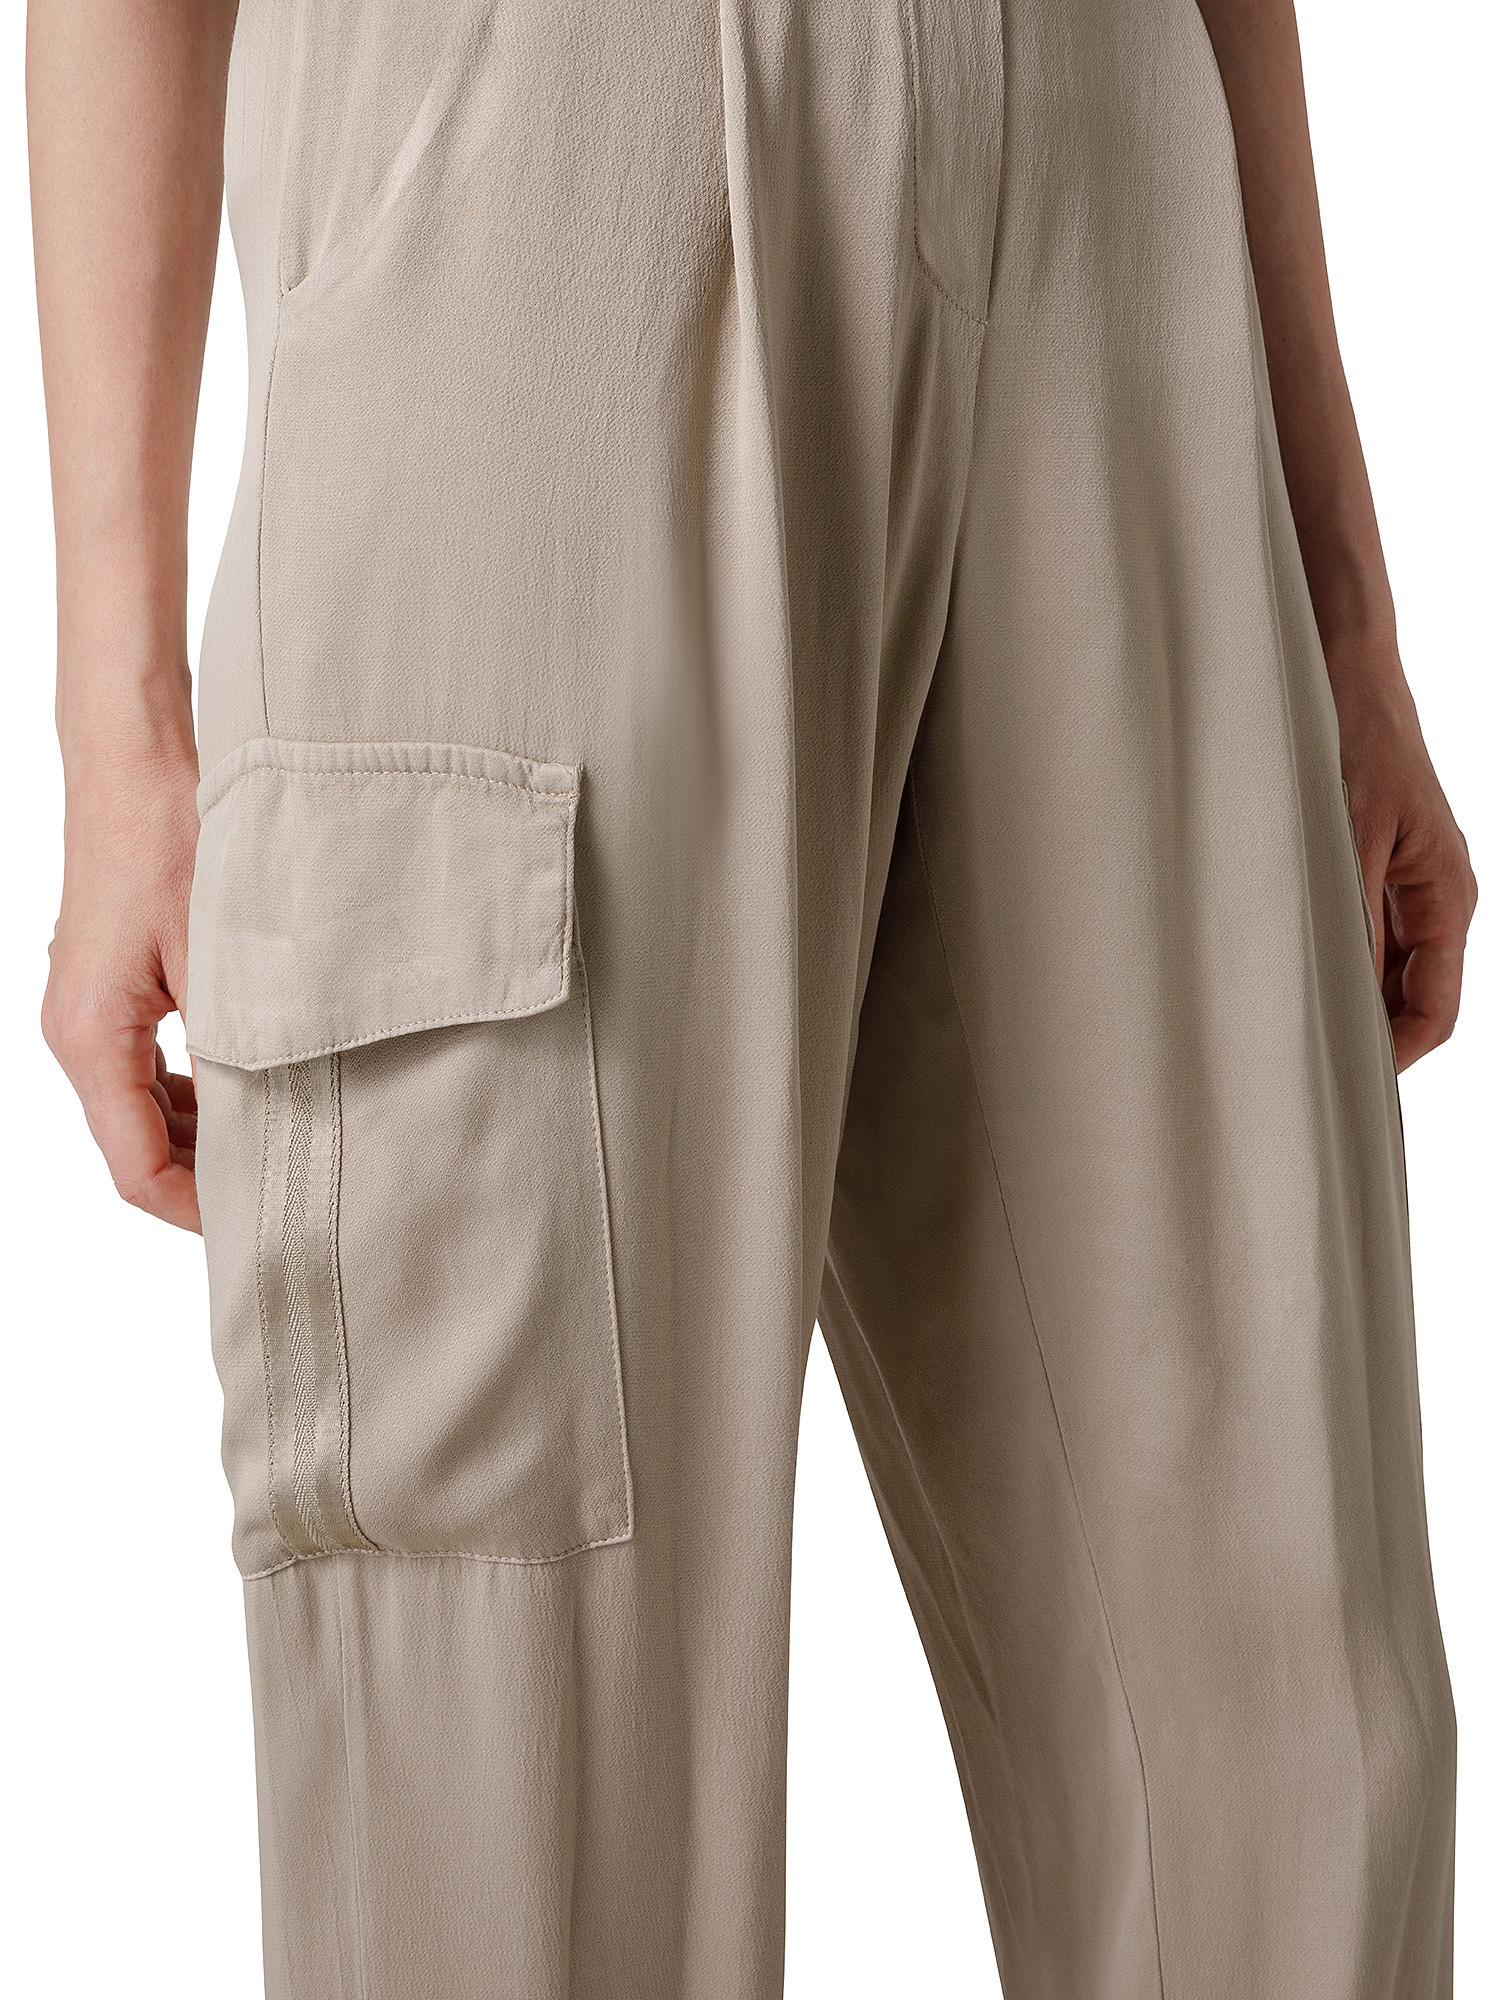 Cargo trousers, Beige, large image number 4